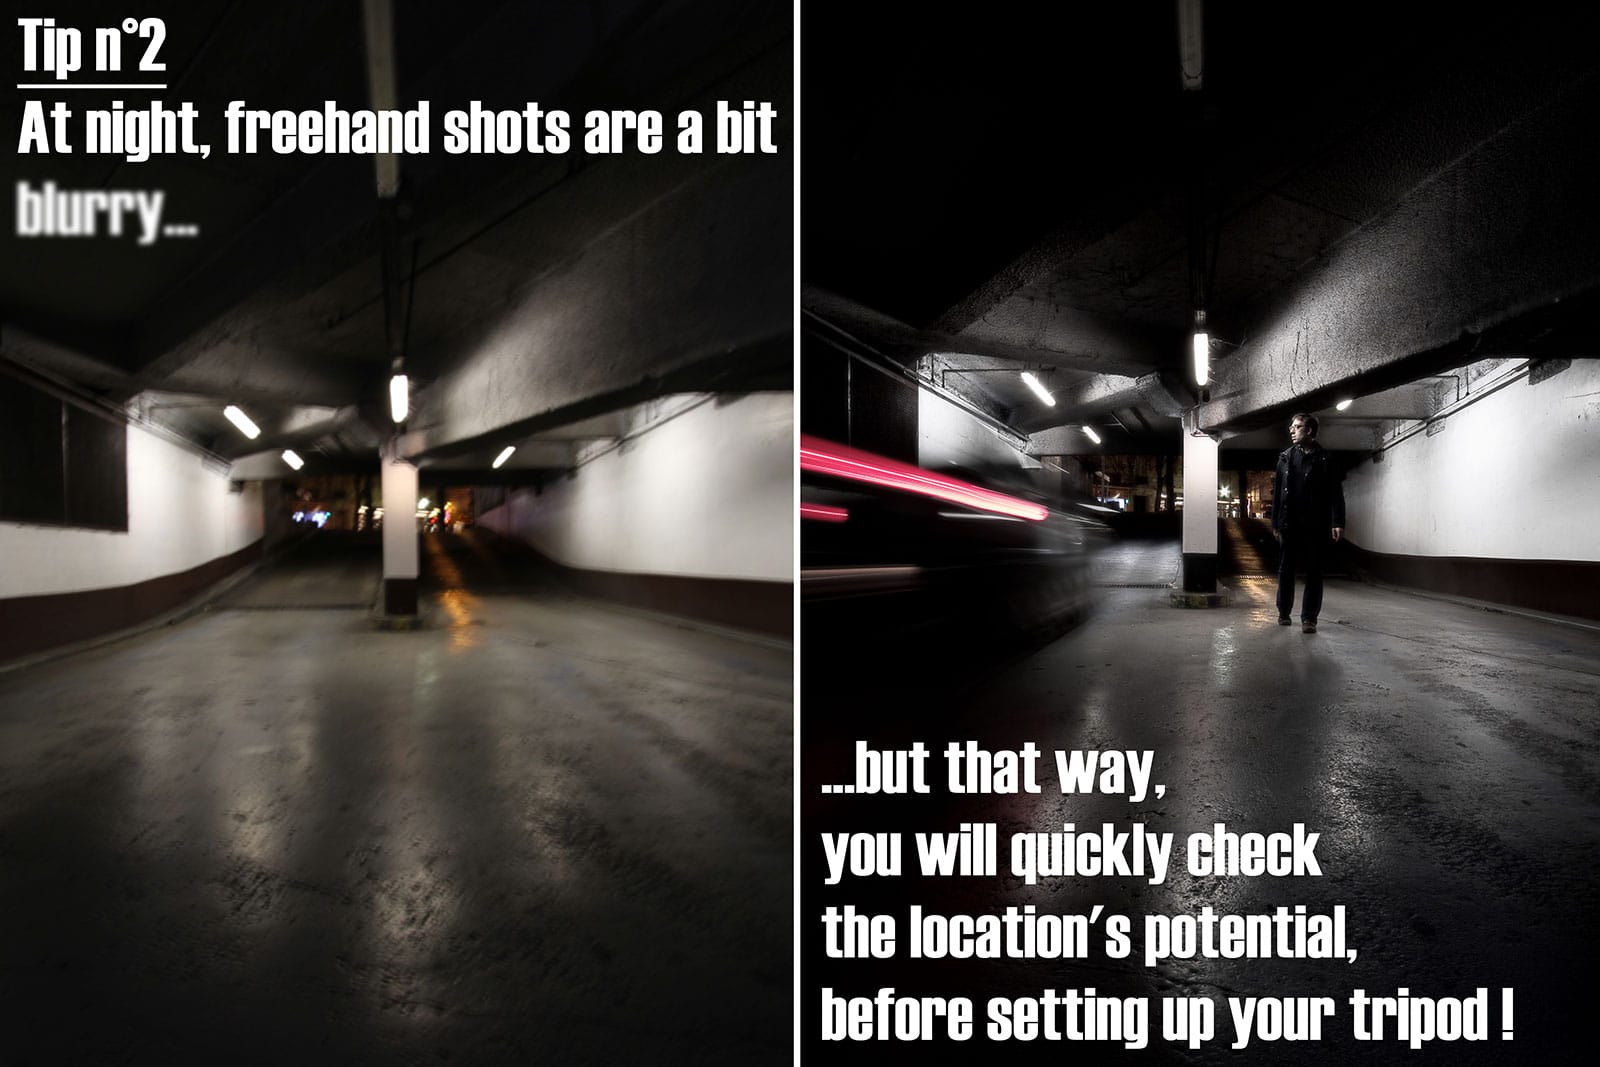 Night photography tip n°1 : Freehand shots